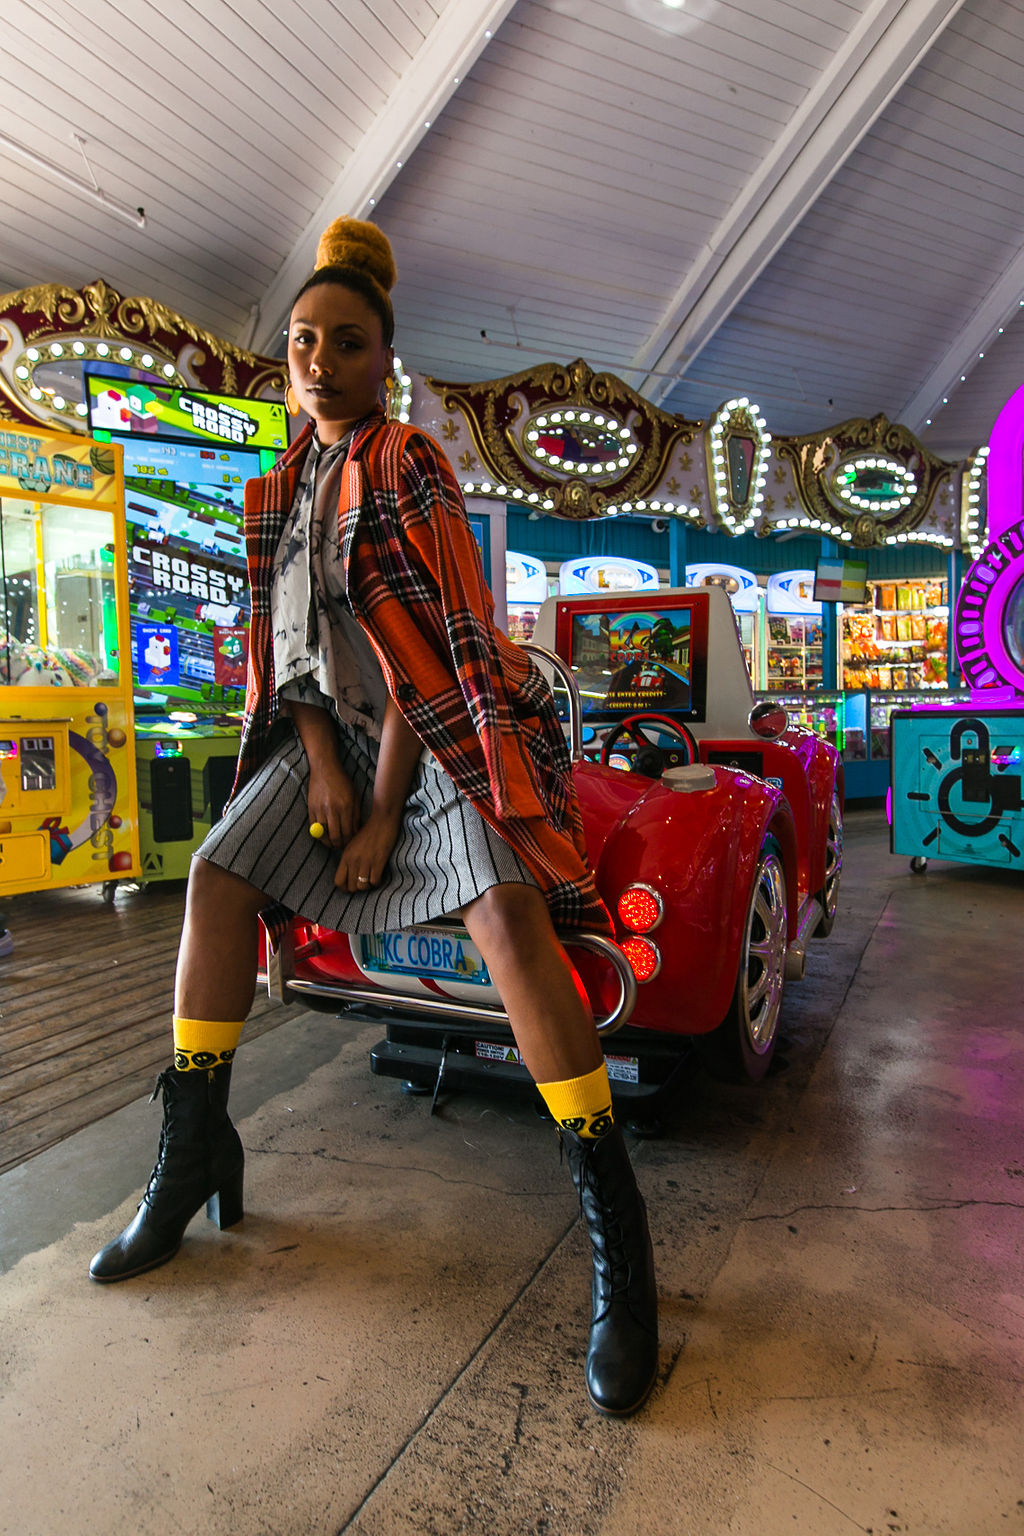 arcade-toy car-fashion photoshoot-nordstrom rack-susina-long beach marina-rsee-xmmtt-wear who you are